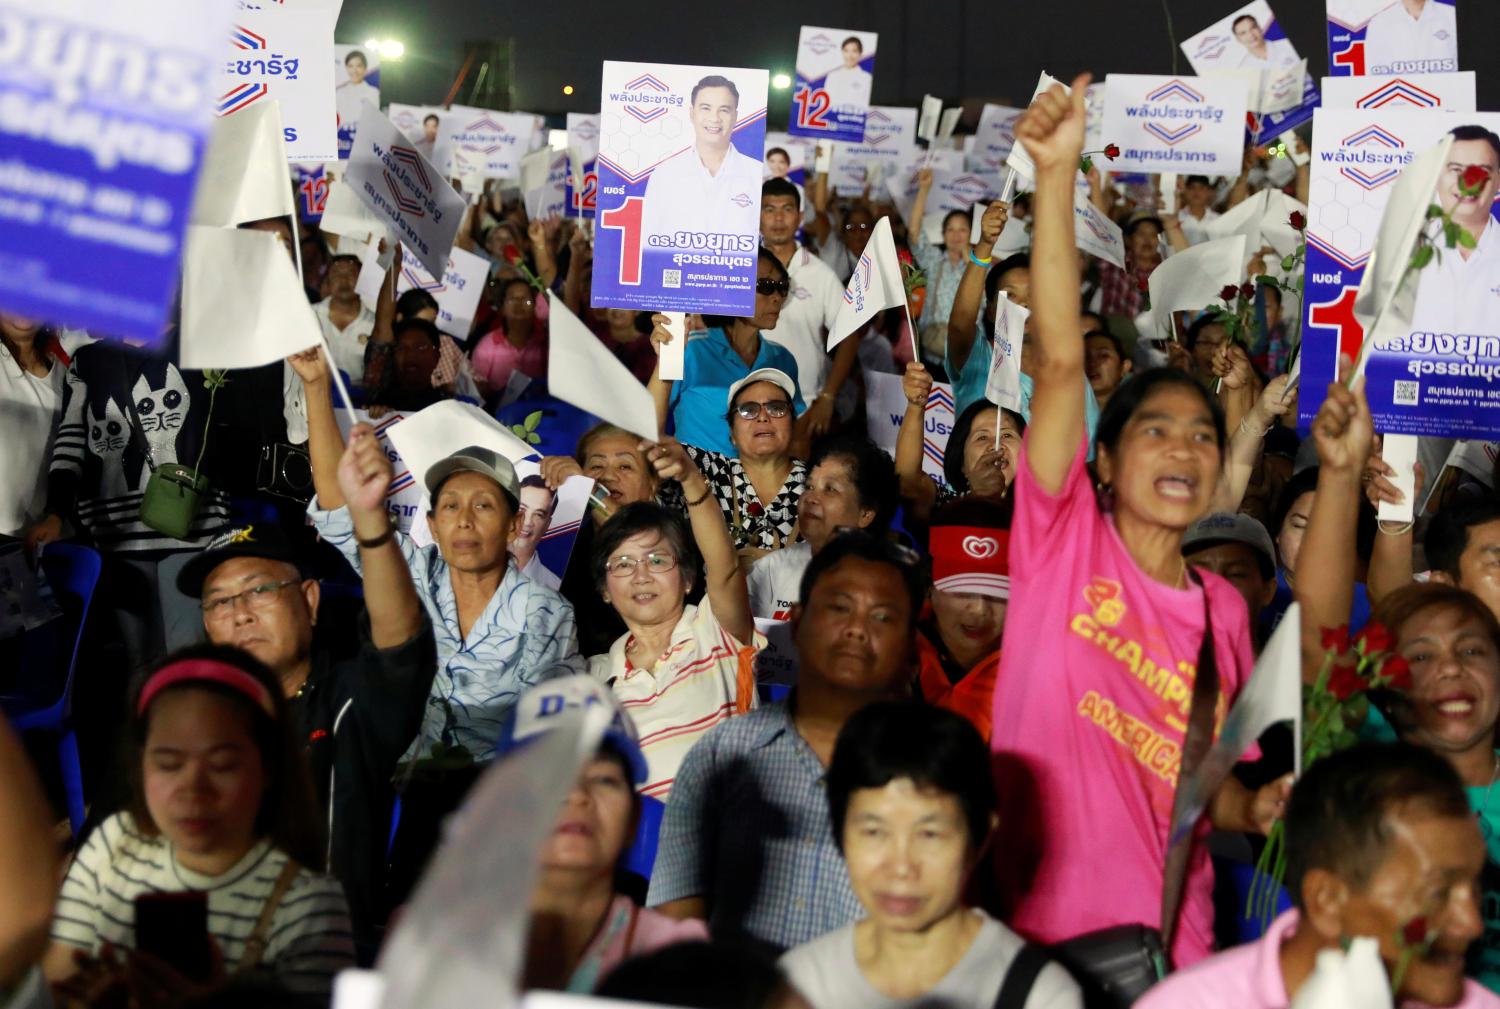 Supporters hold up signs during the Palang Pracharat Party campaign rally in Bangkok, Thailand, February 24, 2019. Picture taken February 24, 2019. REUTERS/Soe Zeya Tun - RC163BF7AD00